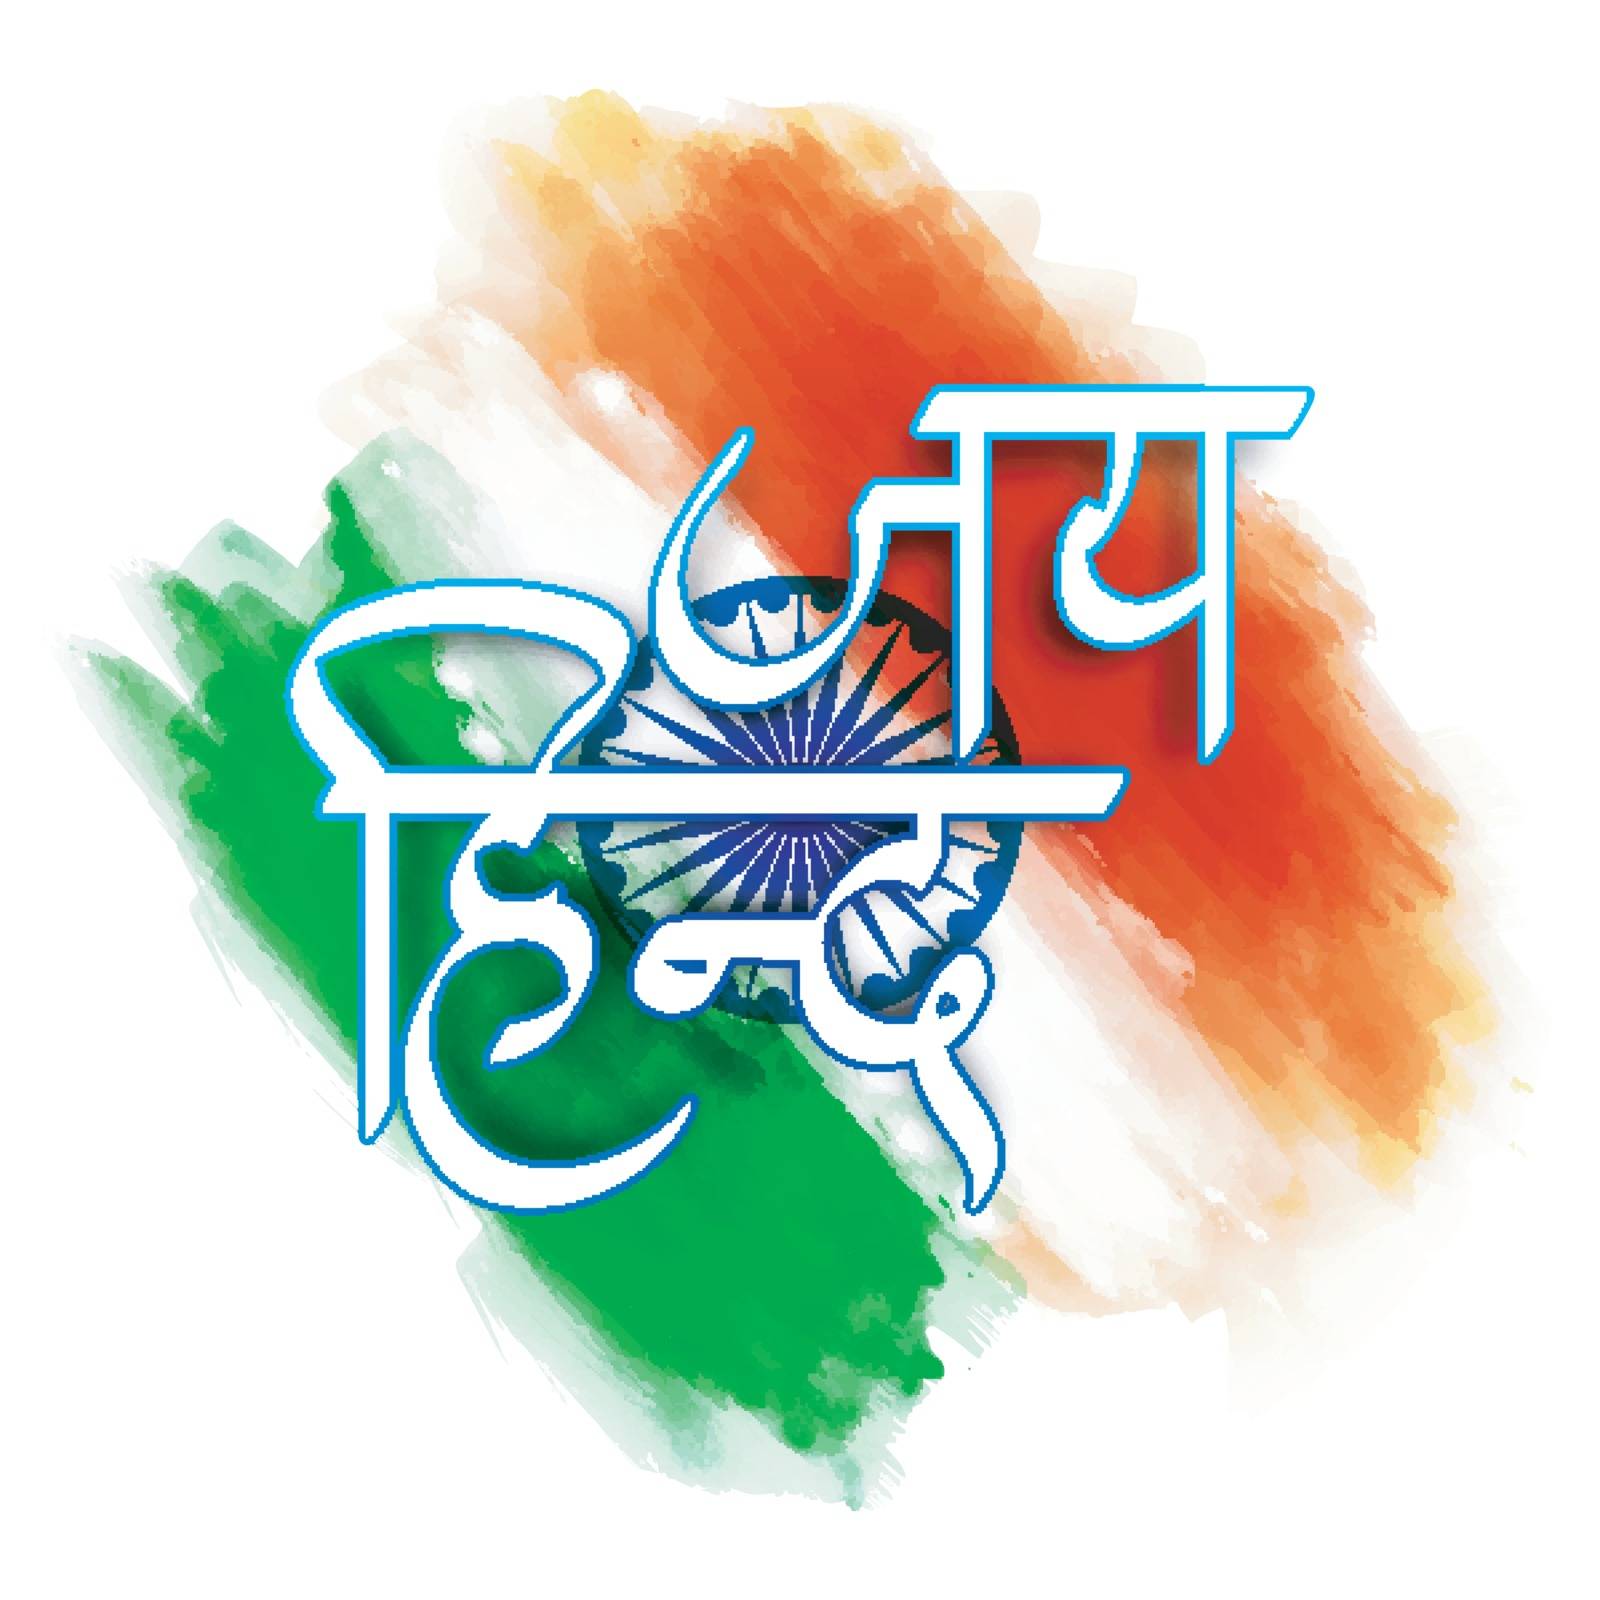 Hindi Text Jai Hind with Indian Flag for Independence Day. Stock Image |  VectorGrove - Royalty Free Vector Images with commercial license